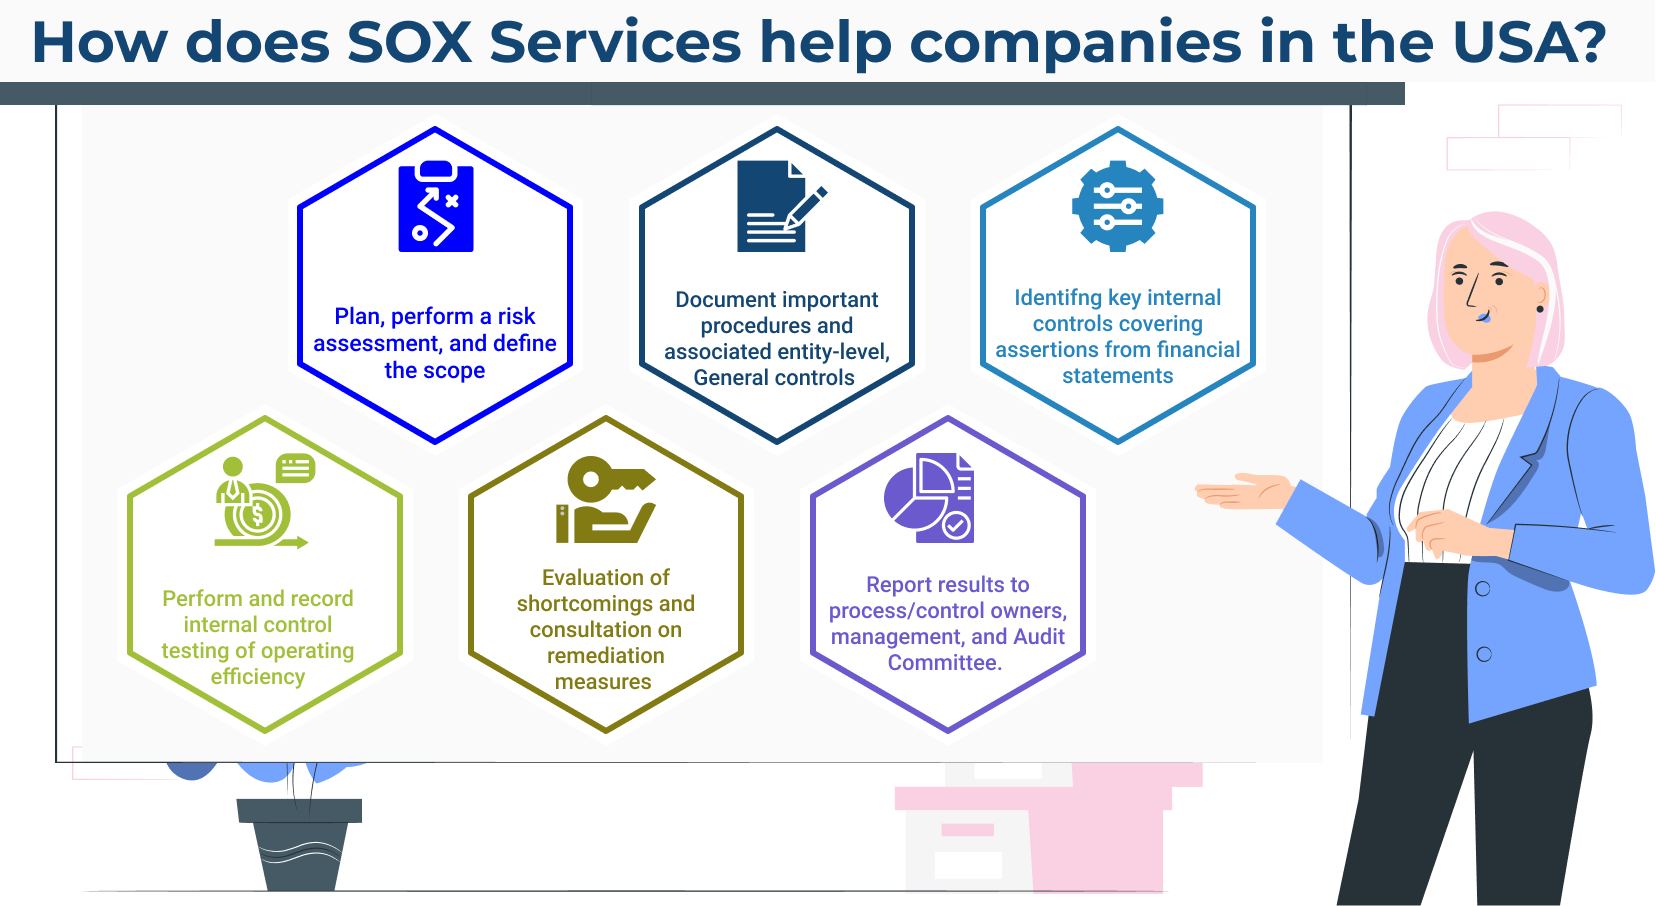 How does SOX Services help companies in the USA?